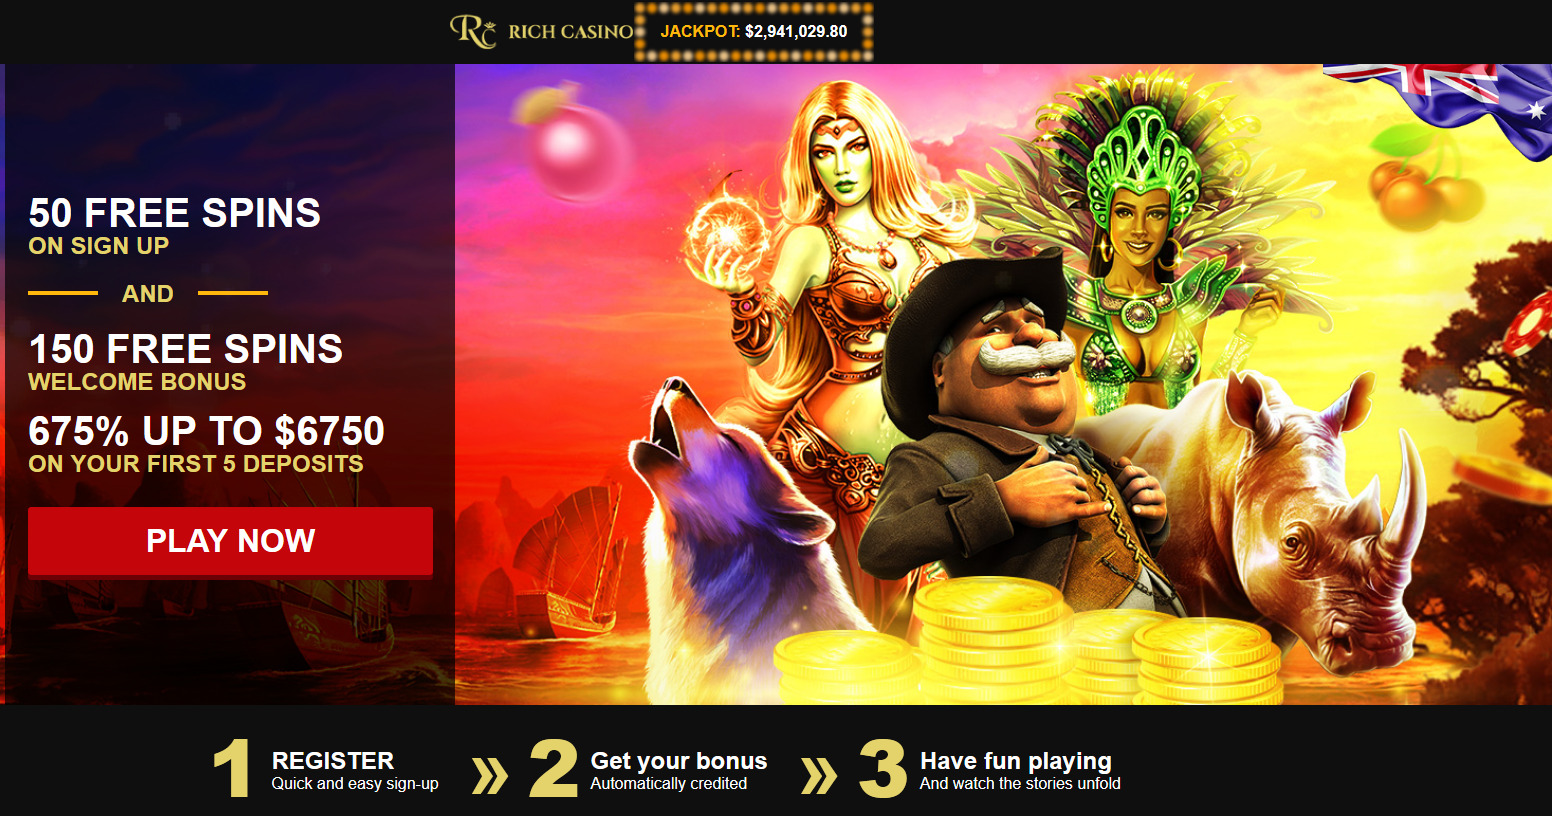 50 FREE
                                SPINS ON SIGN UP AND 150 FREE SPINS
                                WELCOME BONUS 675% UP TO $6750 ON YOUR
                                FIRST 5 DEPOSITS